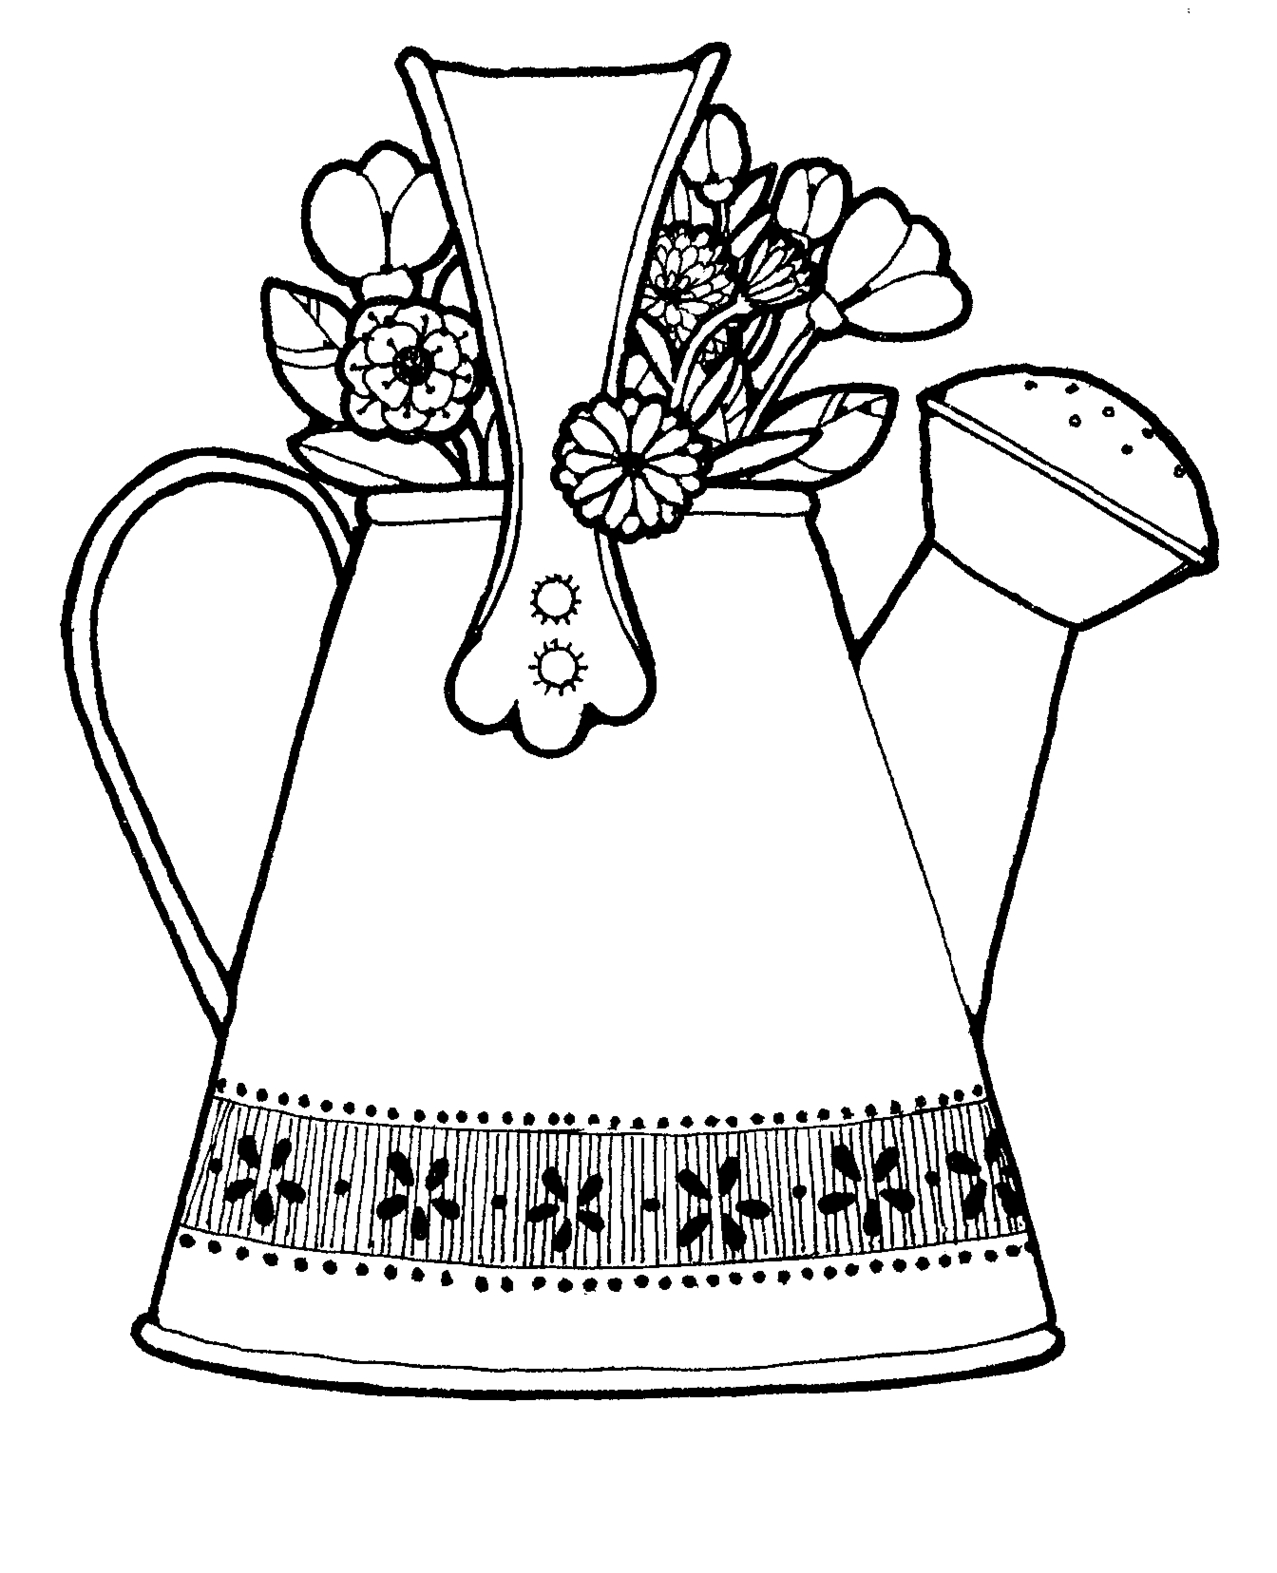 Watering can colouring clipart